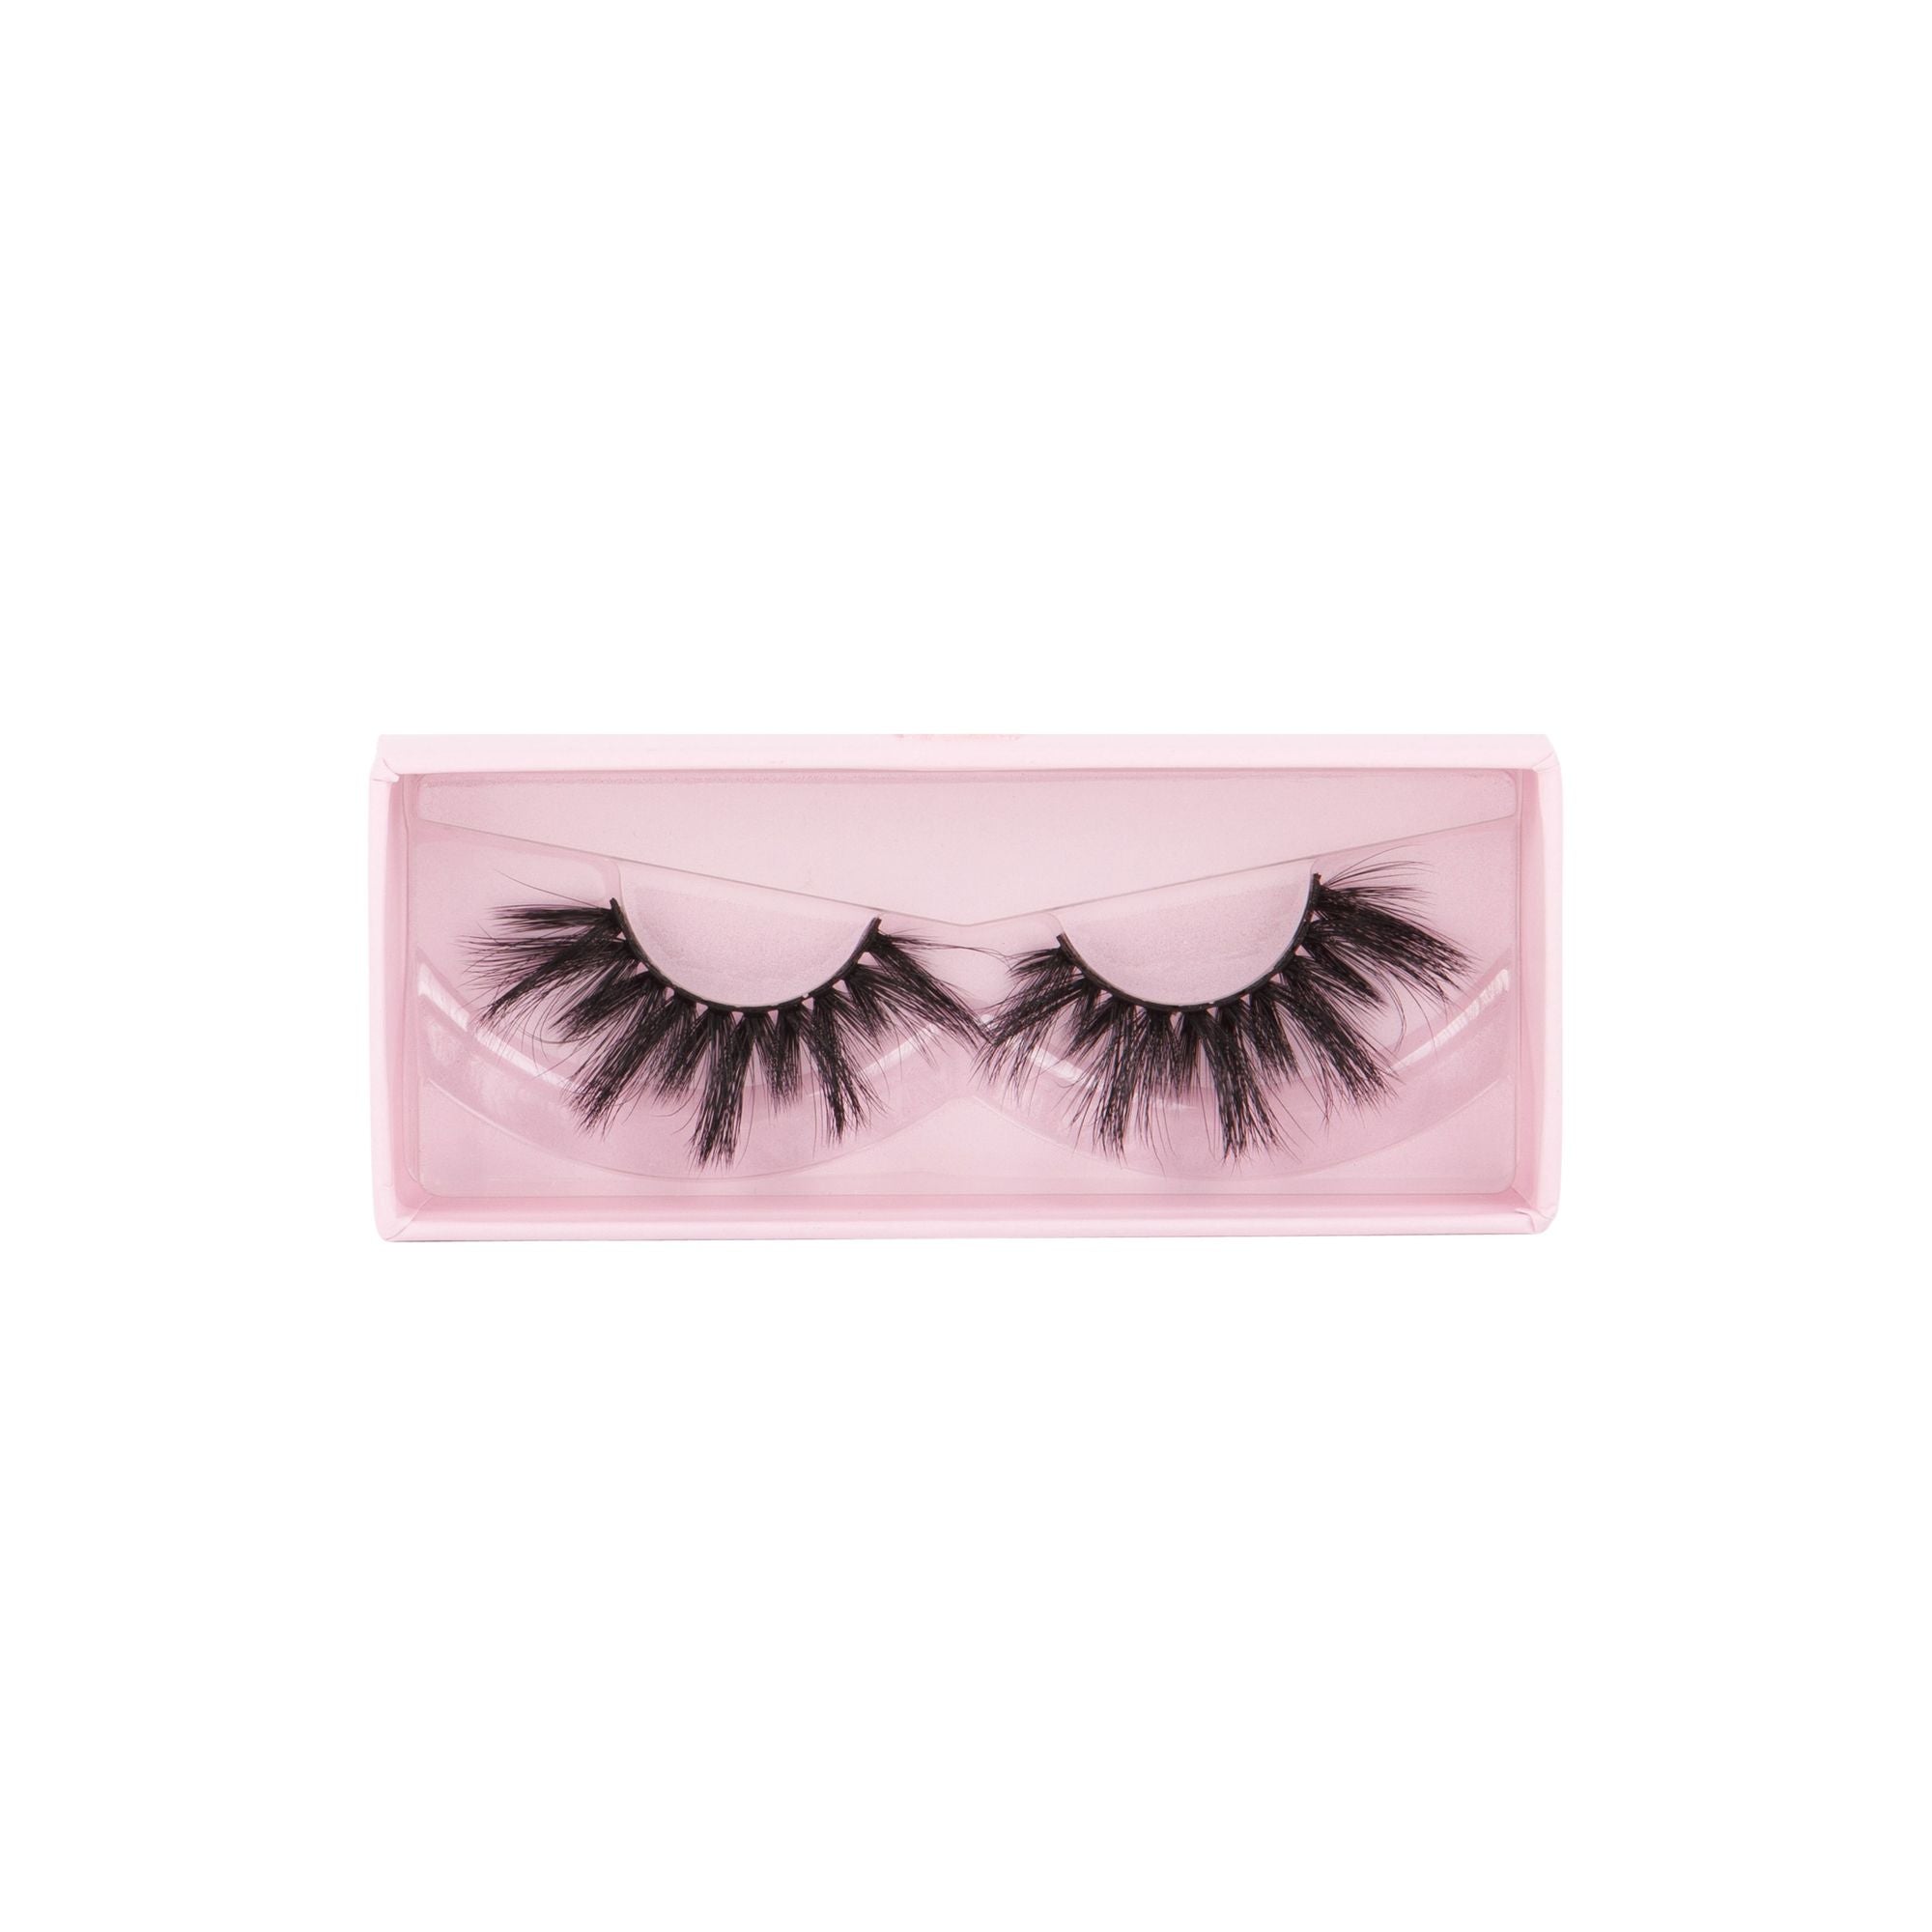 Glamour Us_Beauty Creations_Lashes_Adulting 3D Silk False Lashes__ADULTING